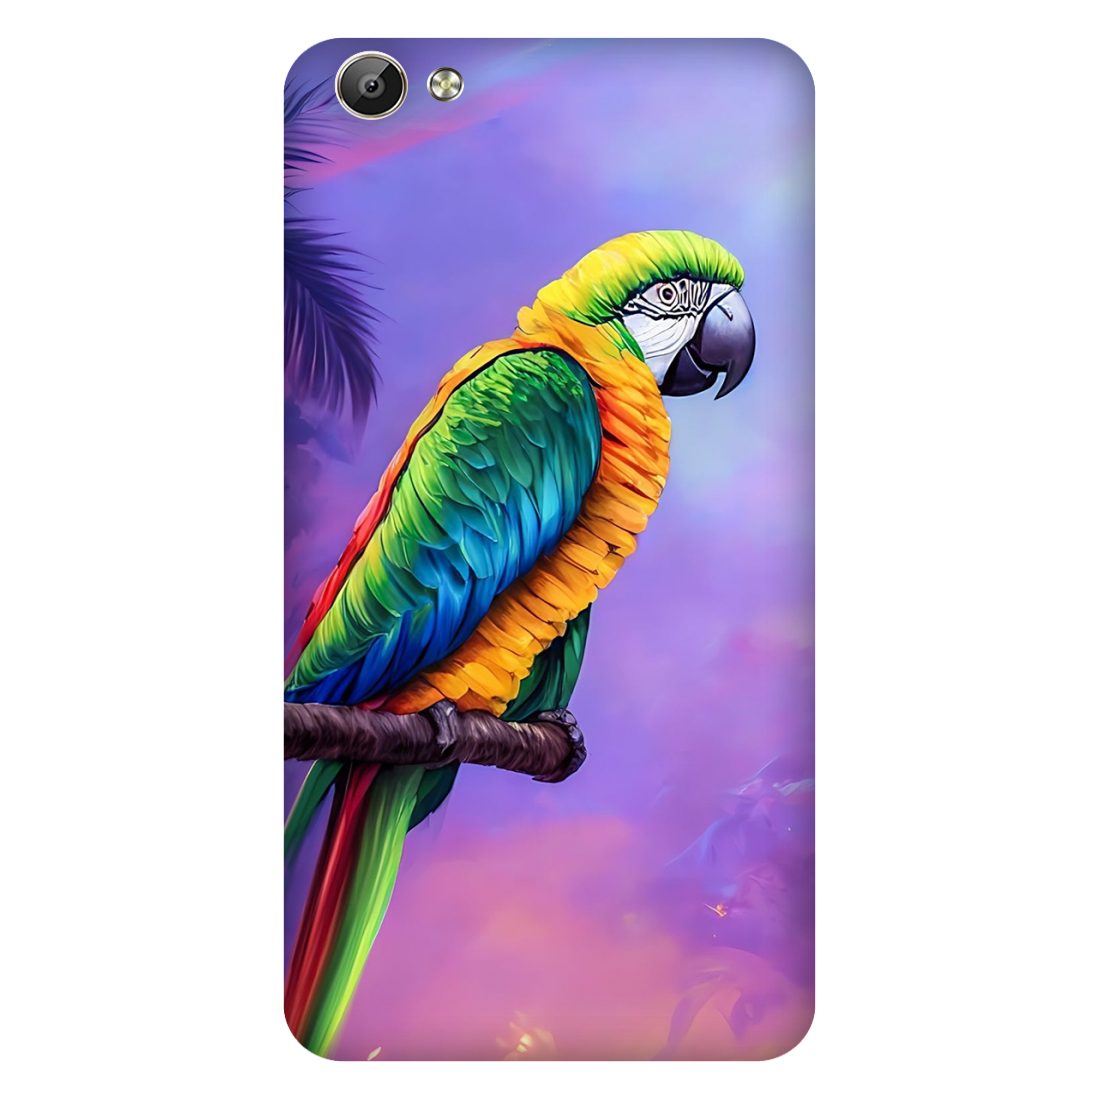 Vibrant Parrot in an Ethereal Atmosphere Case Vivo Y65